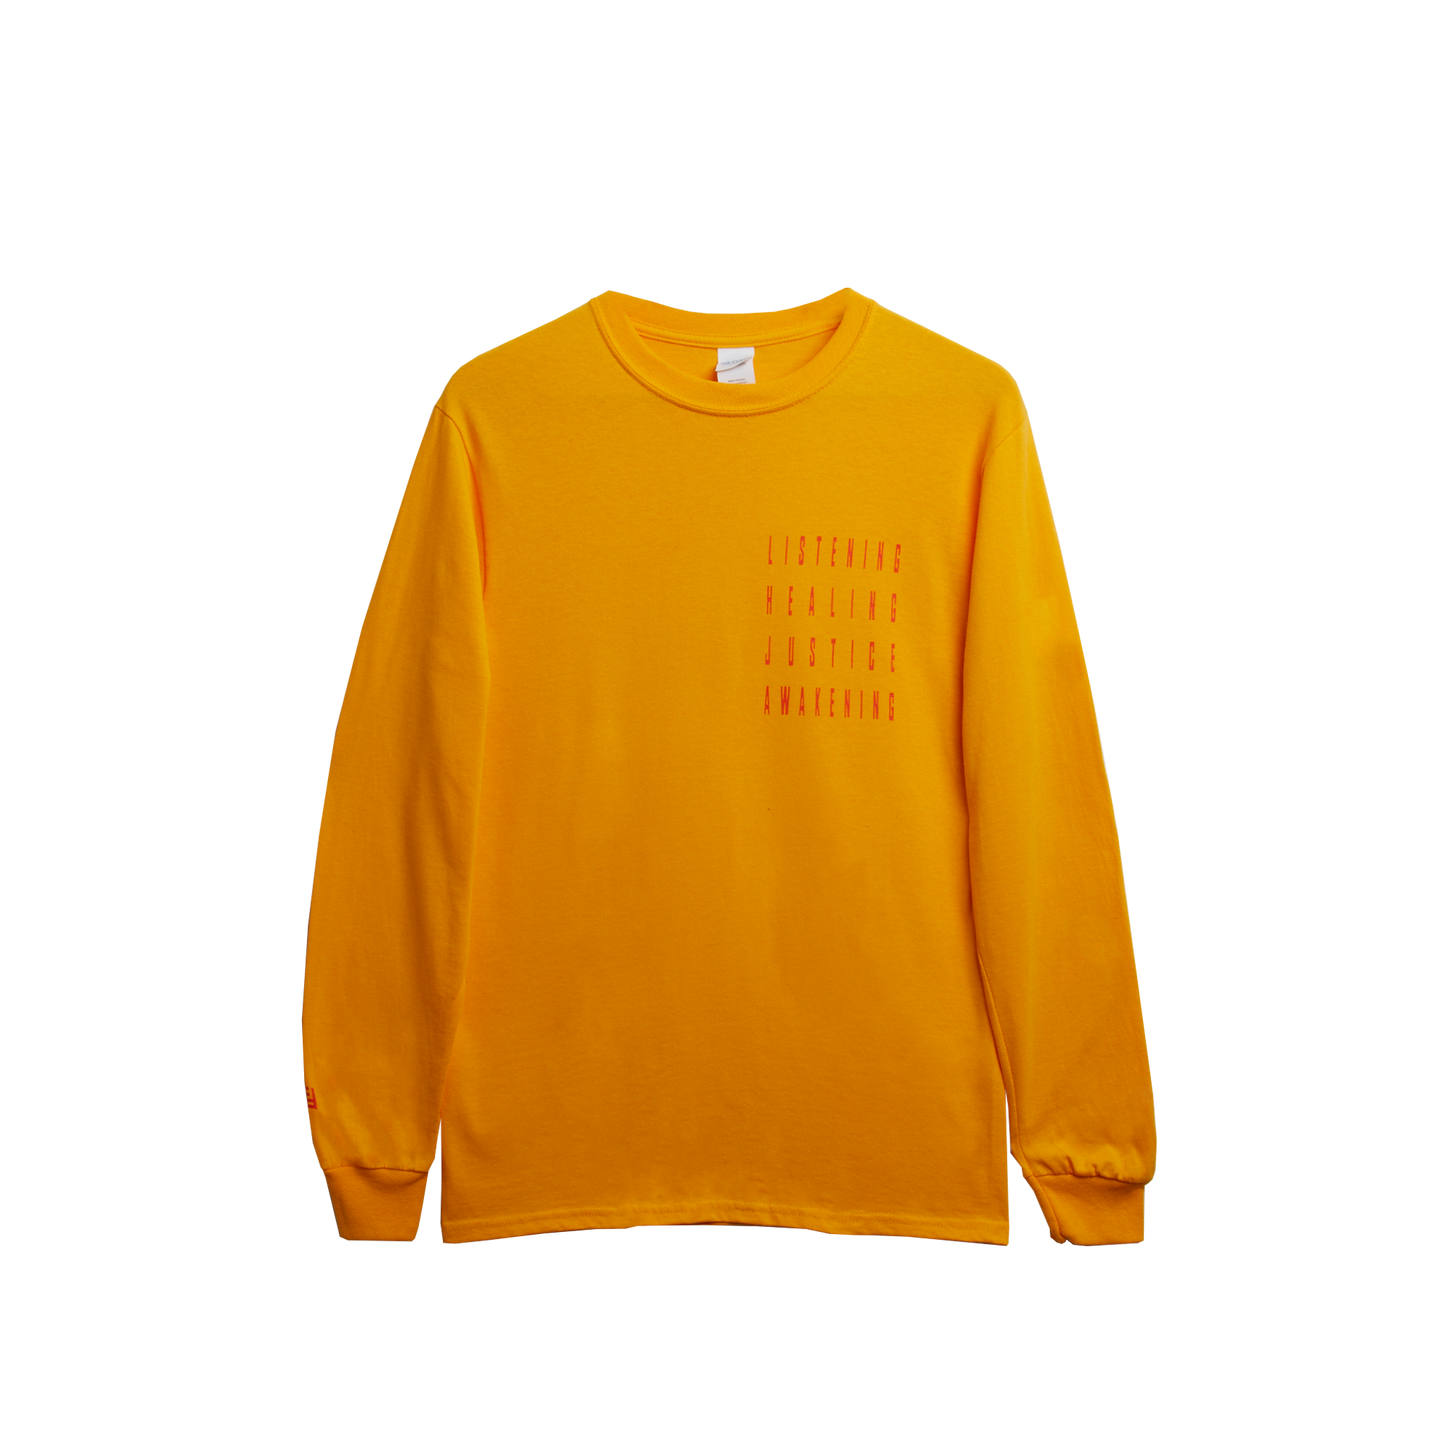 For Freedoms Classic Long Sleeve